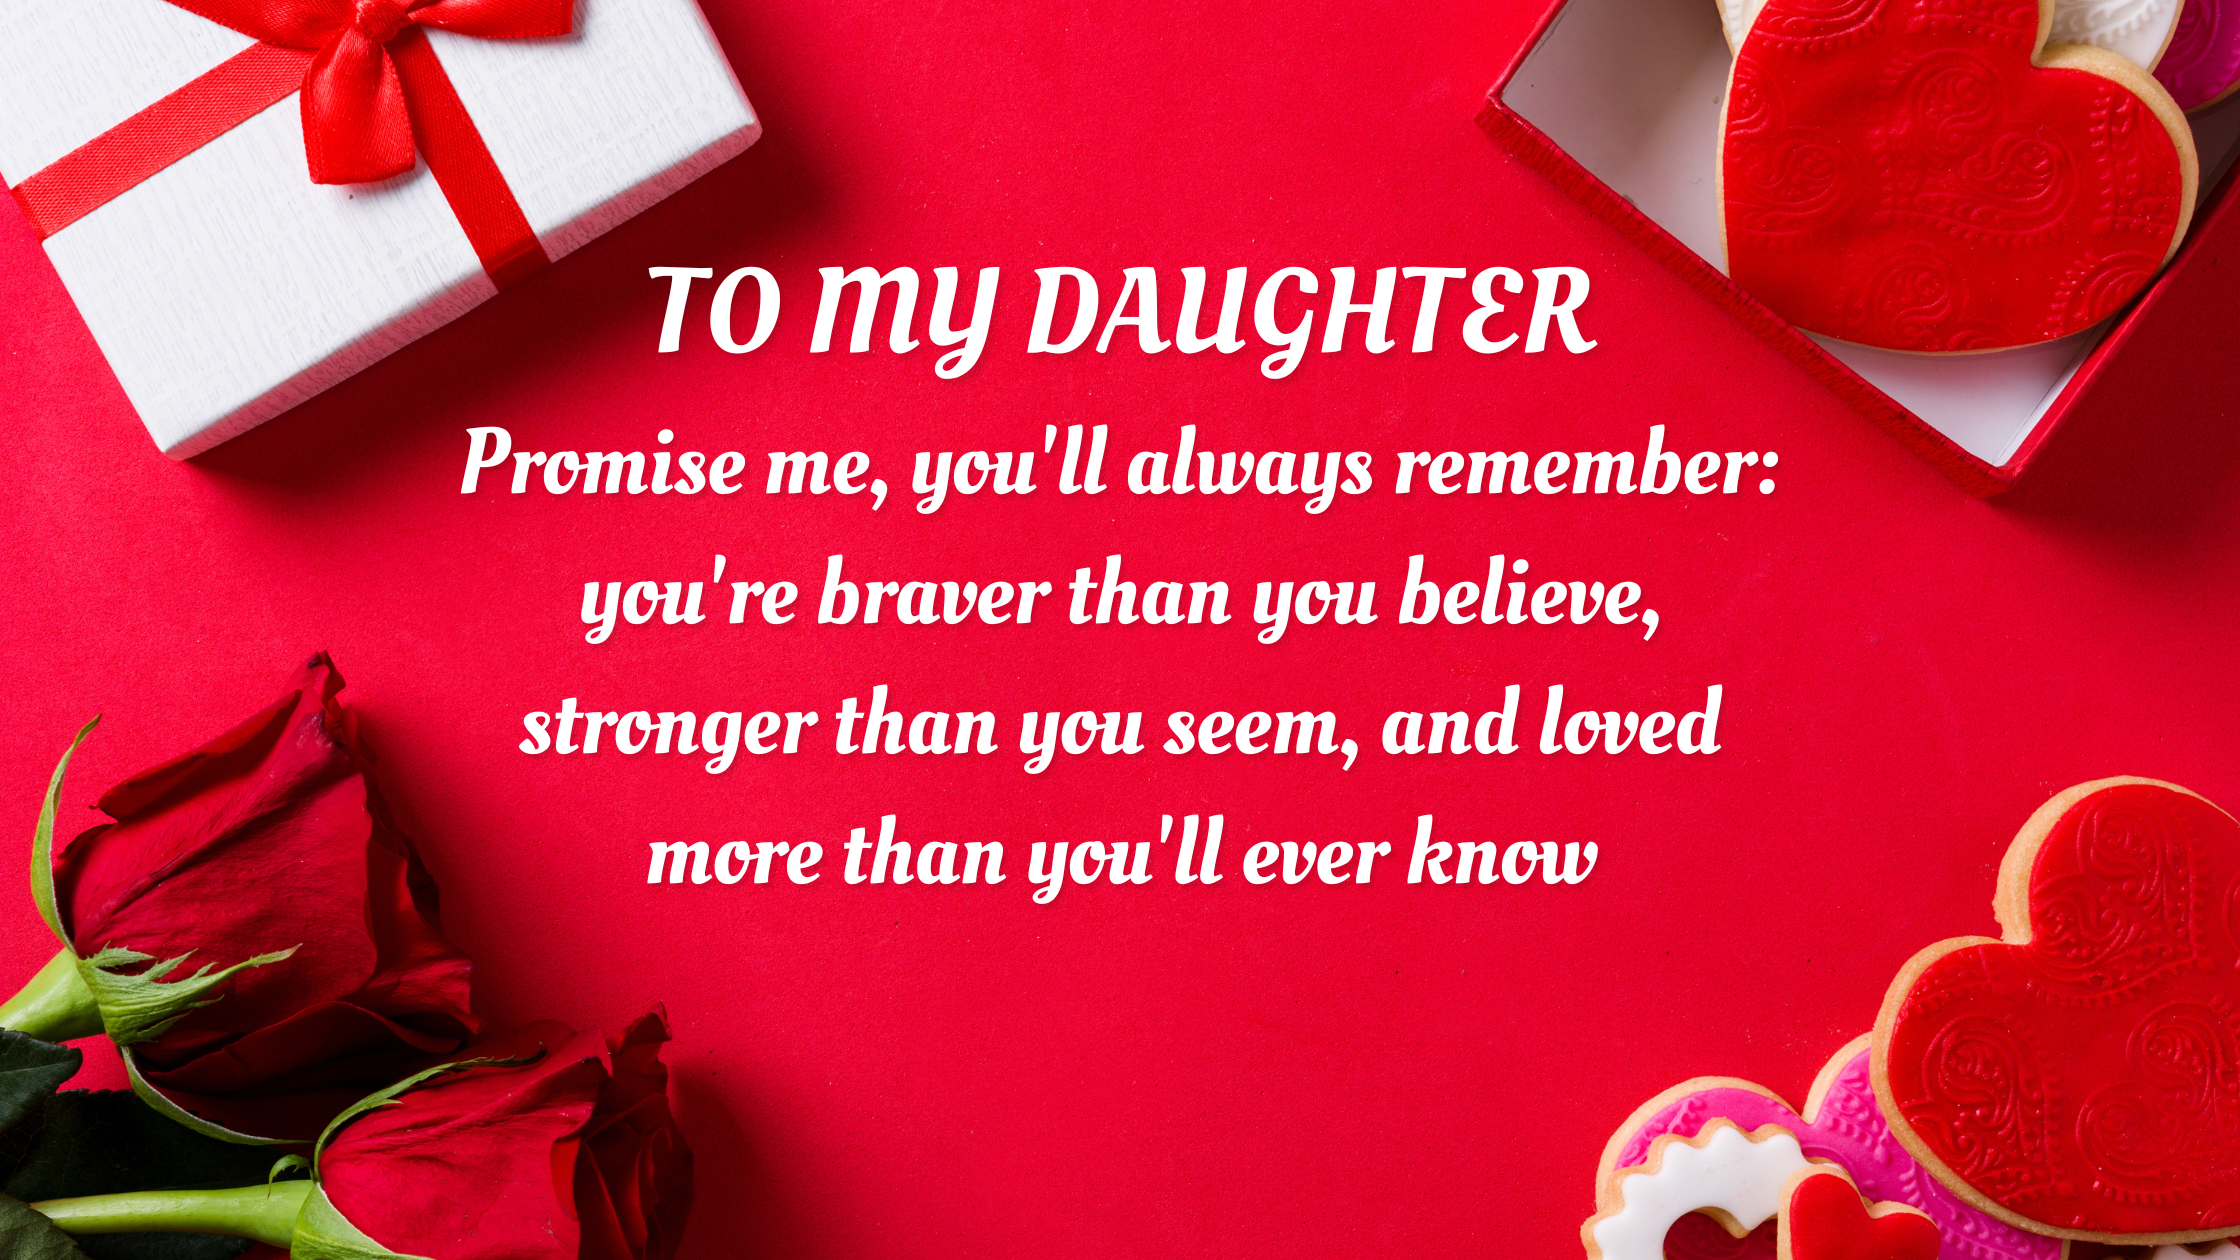 10 Heartfelt Special Daughter Quotes from Mom